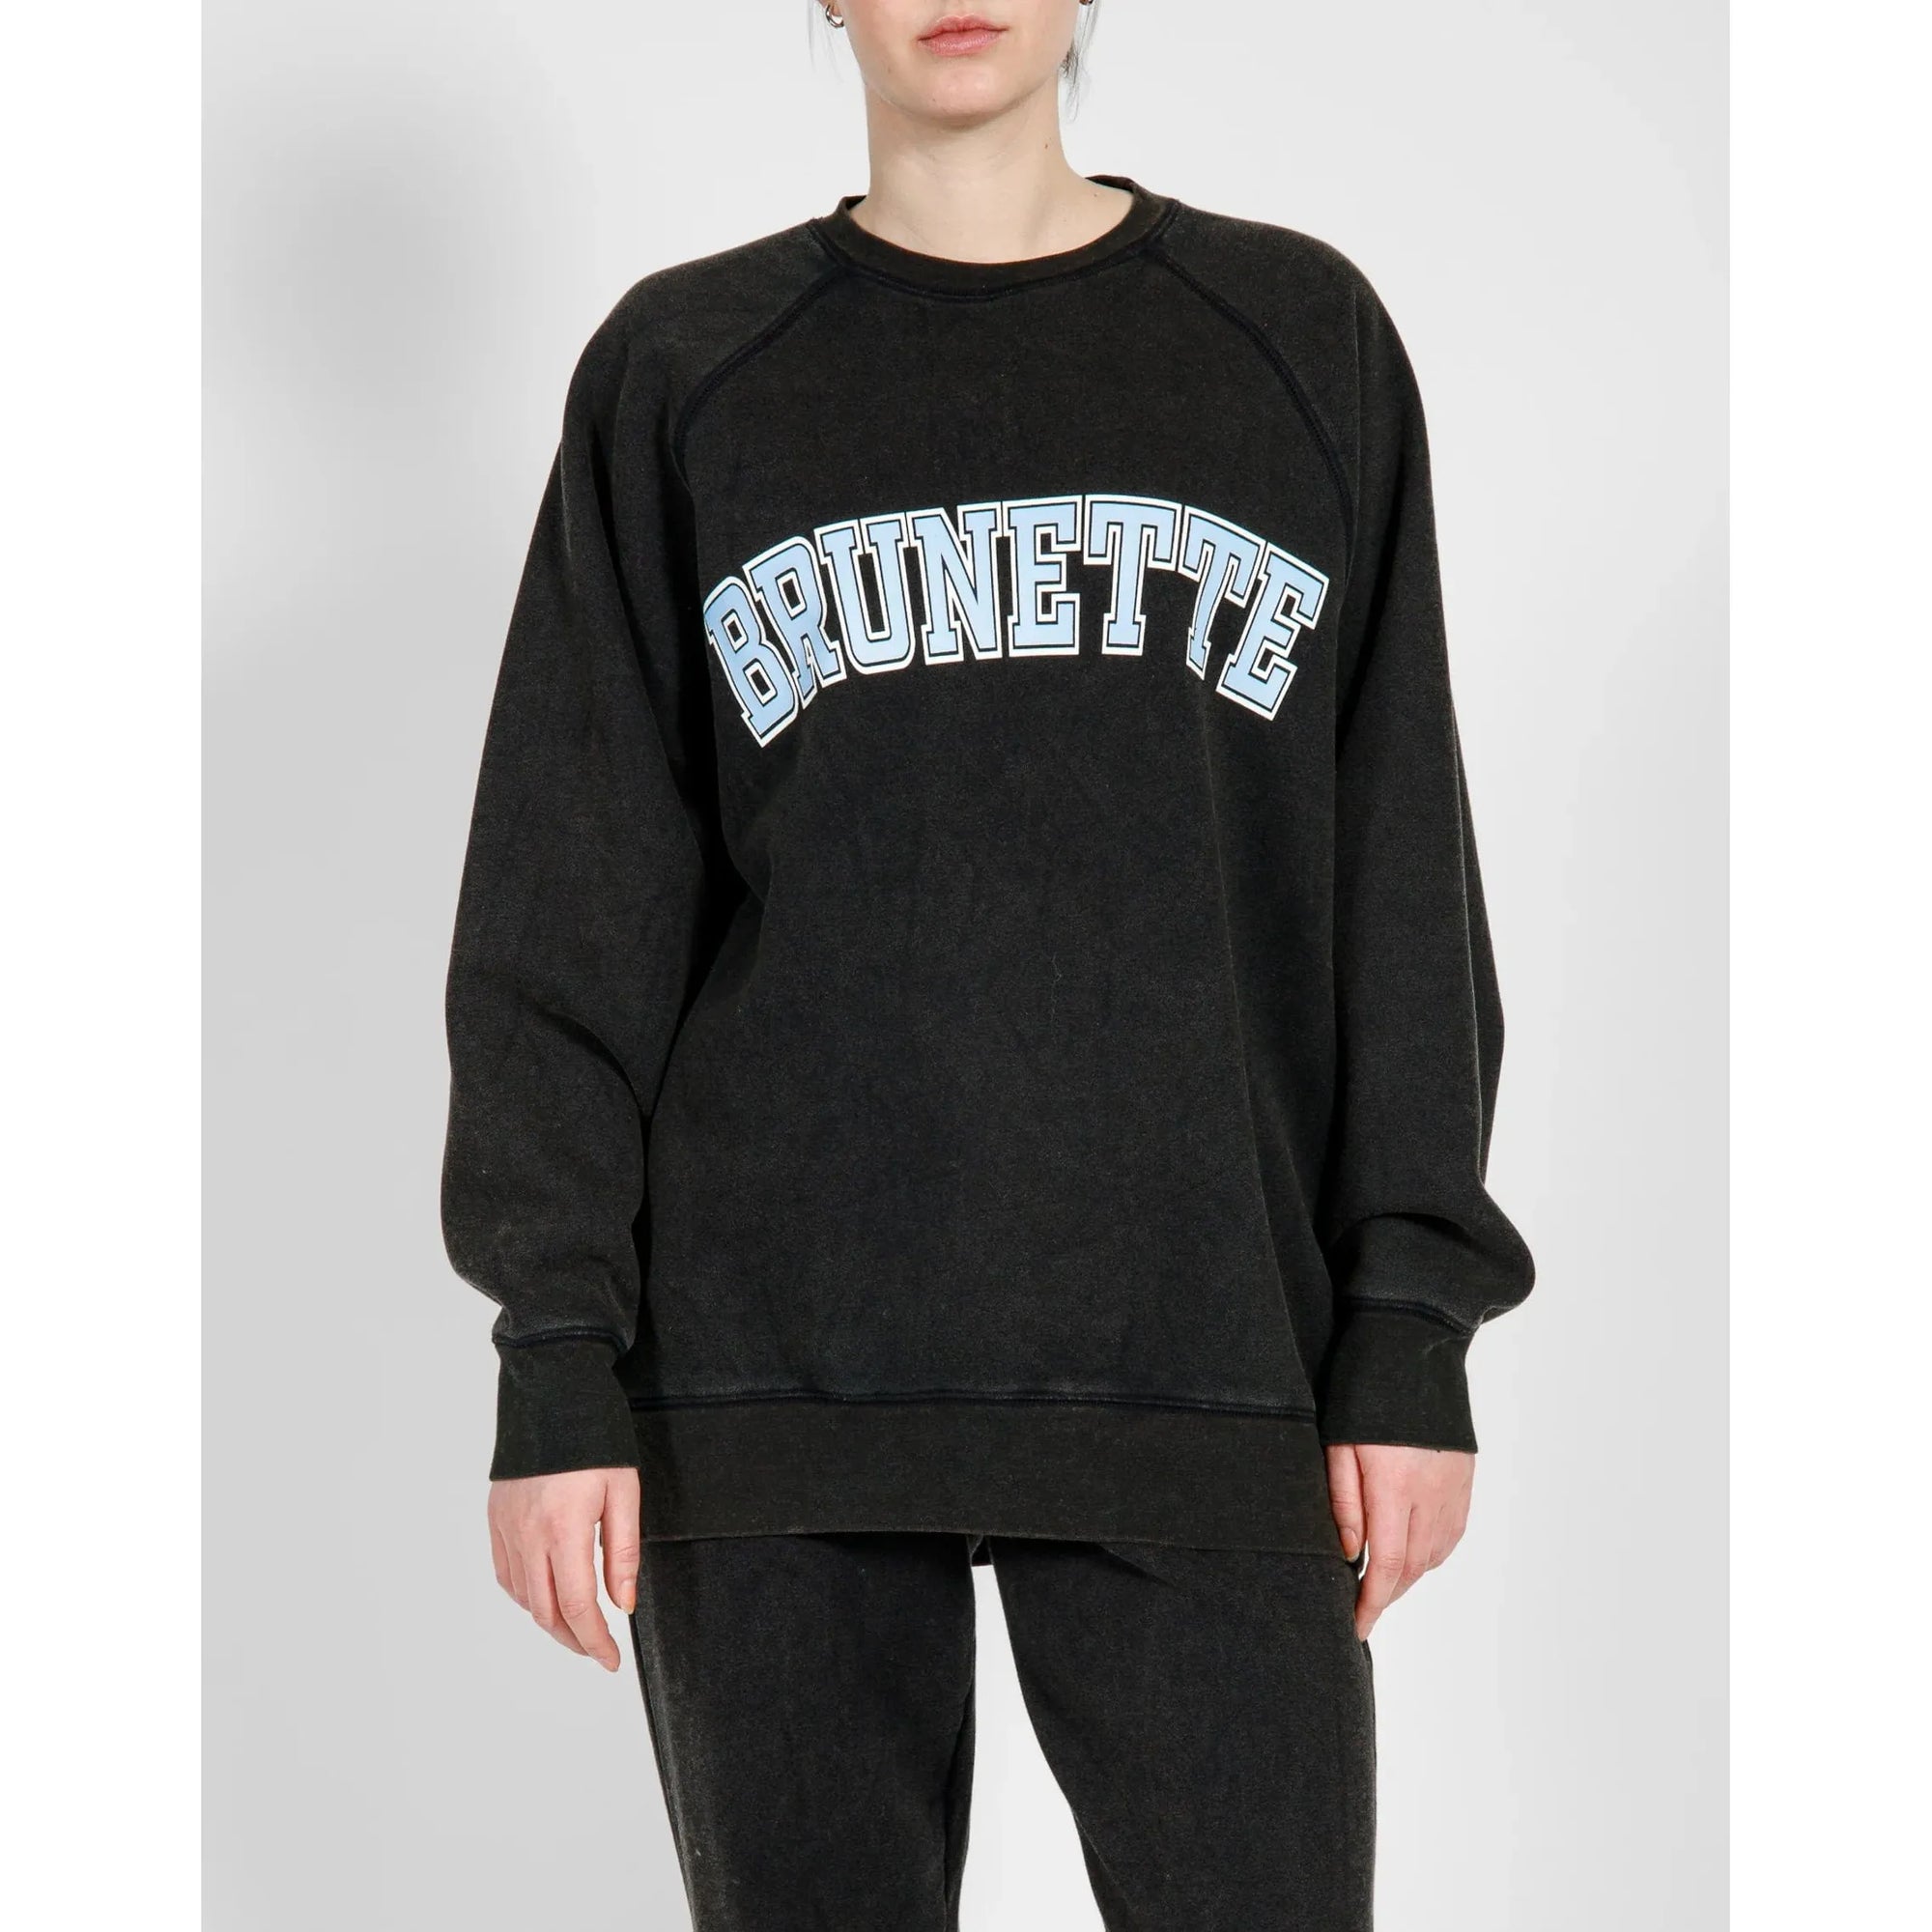 Brunette the Label Washed Black-Baby Blue / XS-S Brunette the Label Brunette Not Your Boyfriend Crew w/ Varsity Haircolours